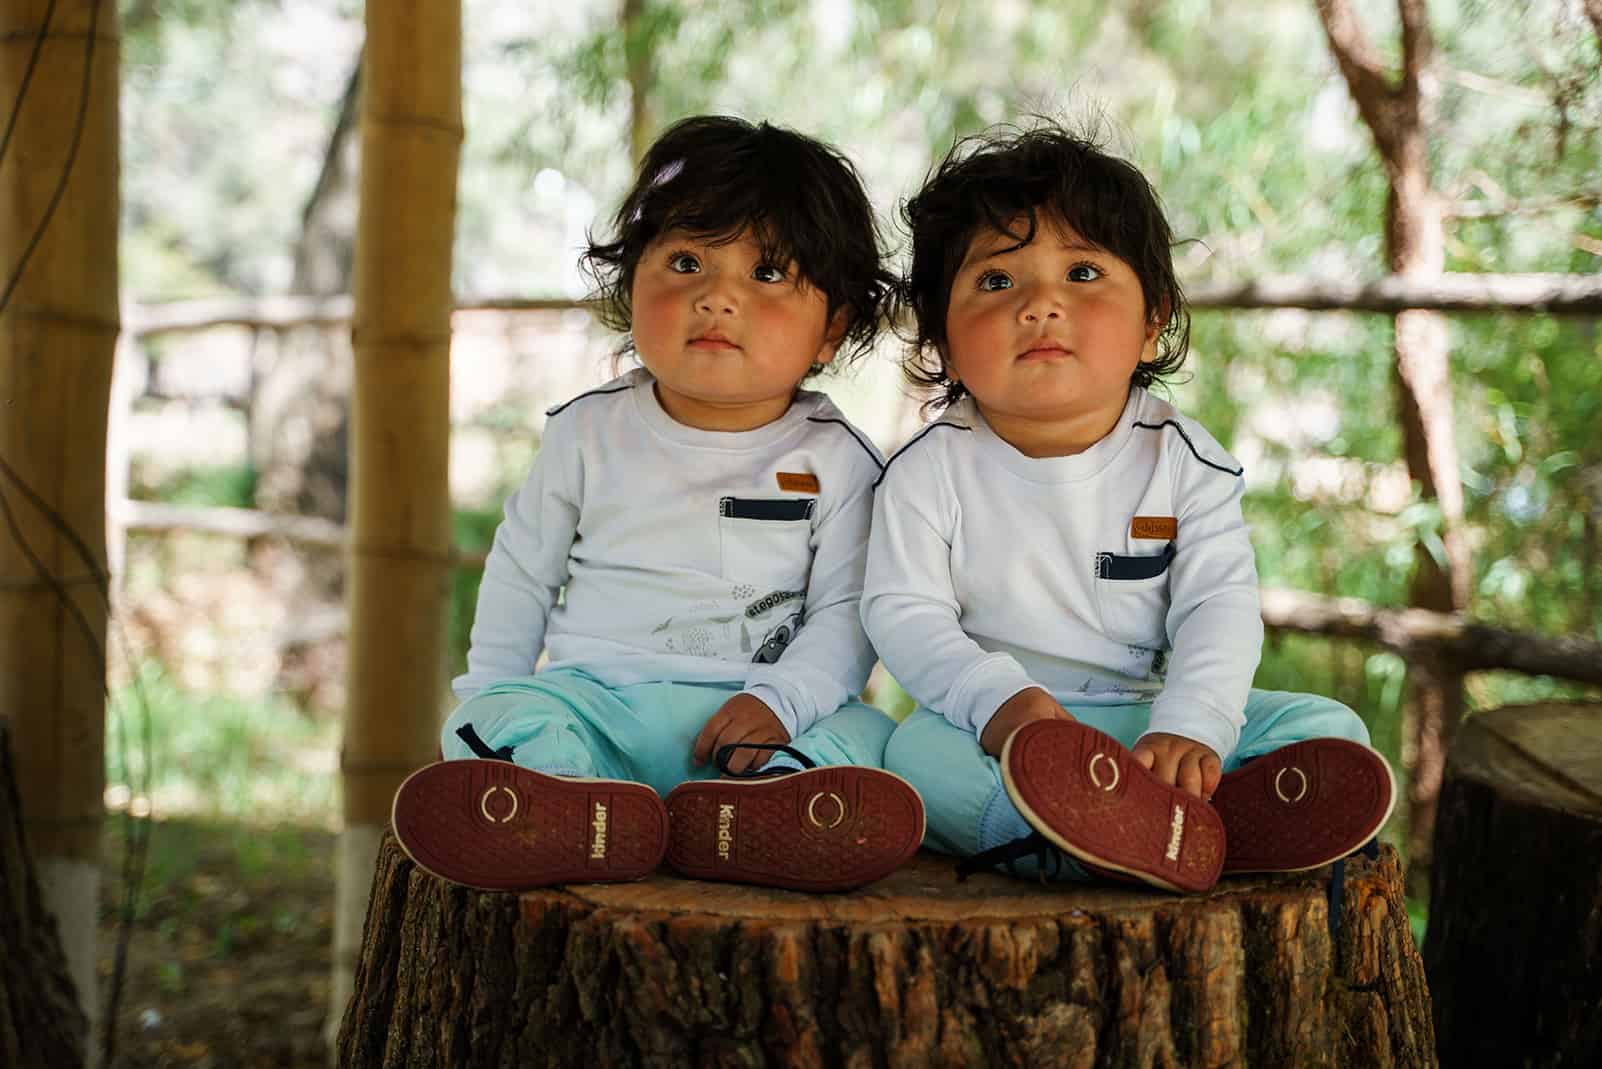 Two Peruvian toddlers sitting on a tree stump